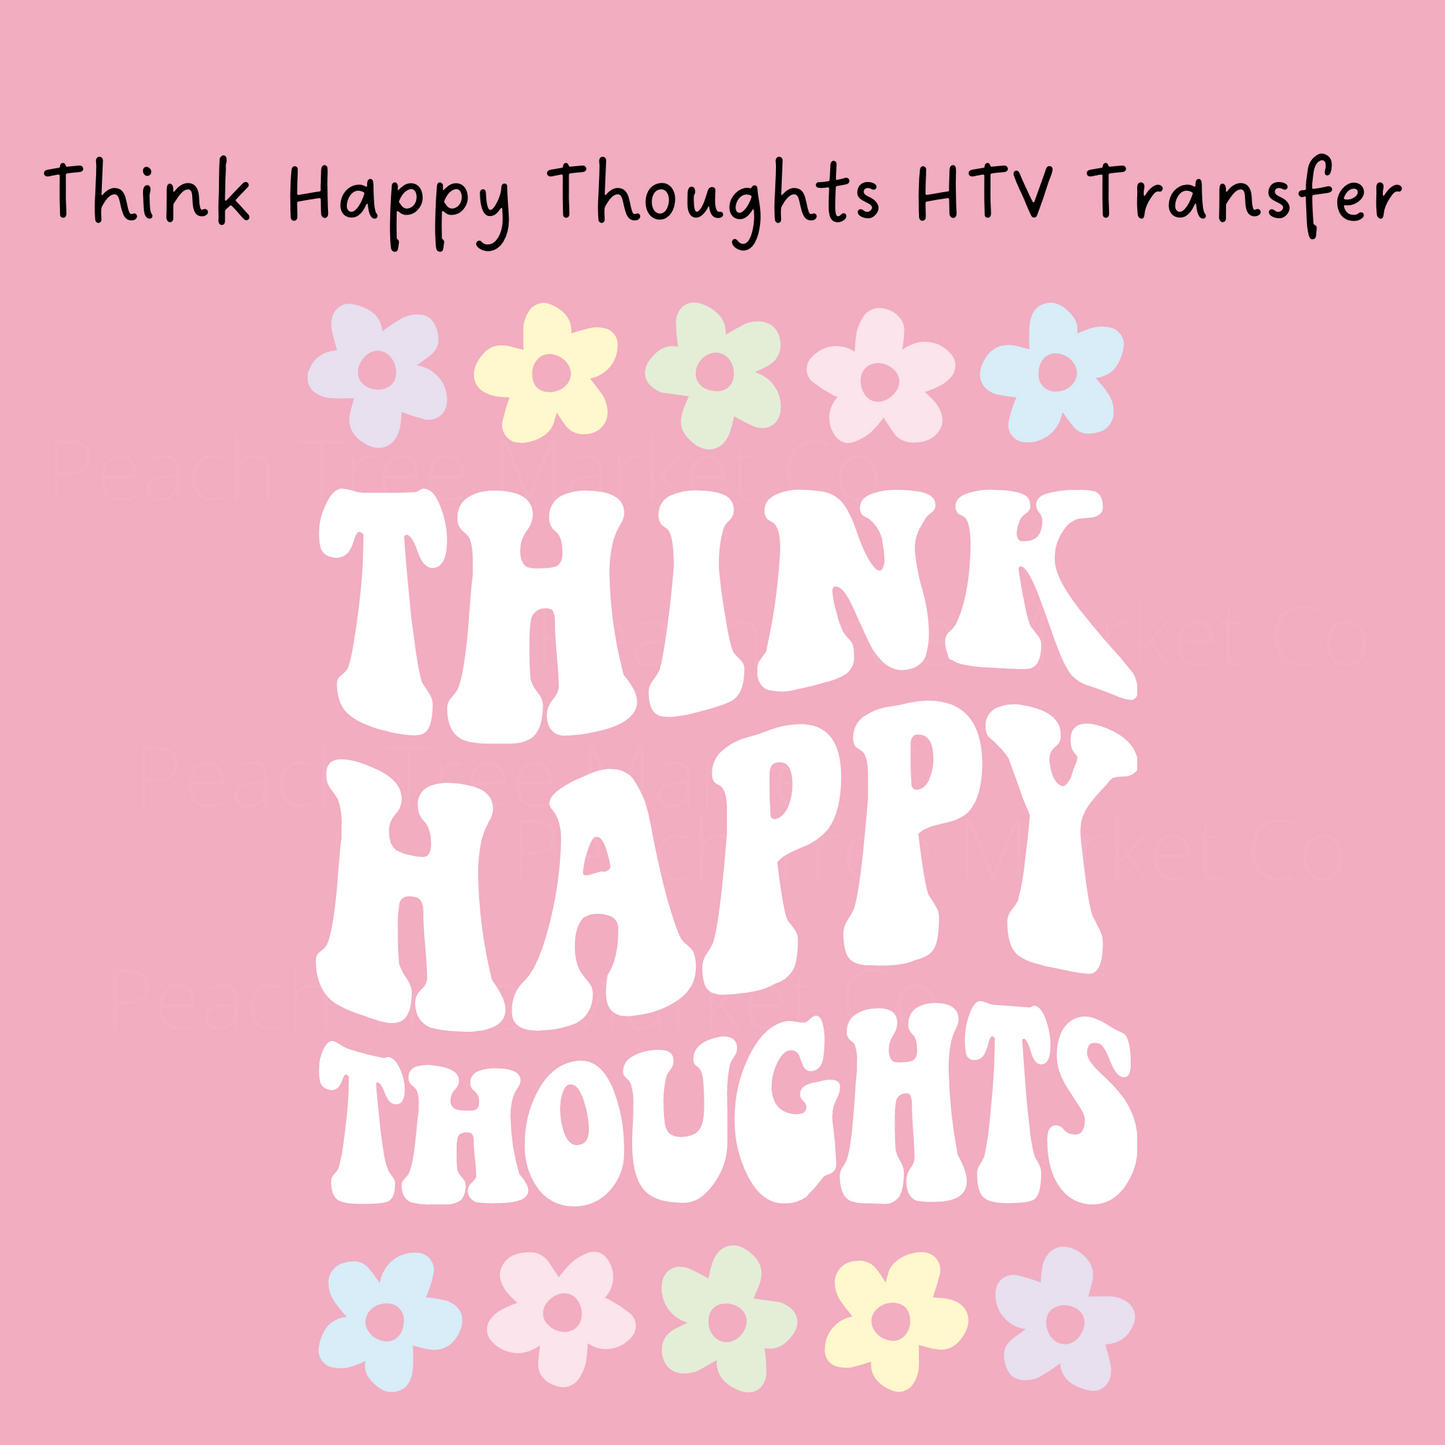 Think Happy Thoughts HTV Transfer